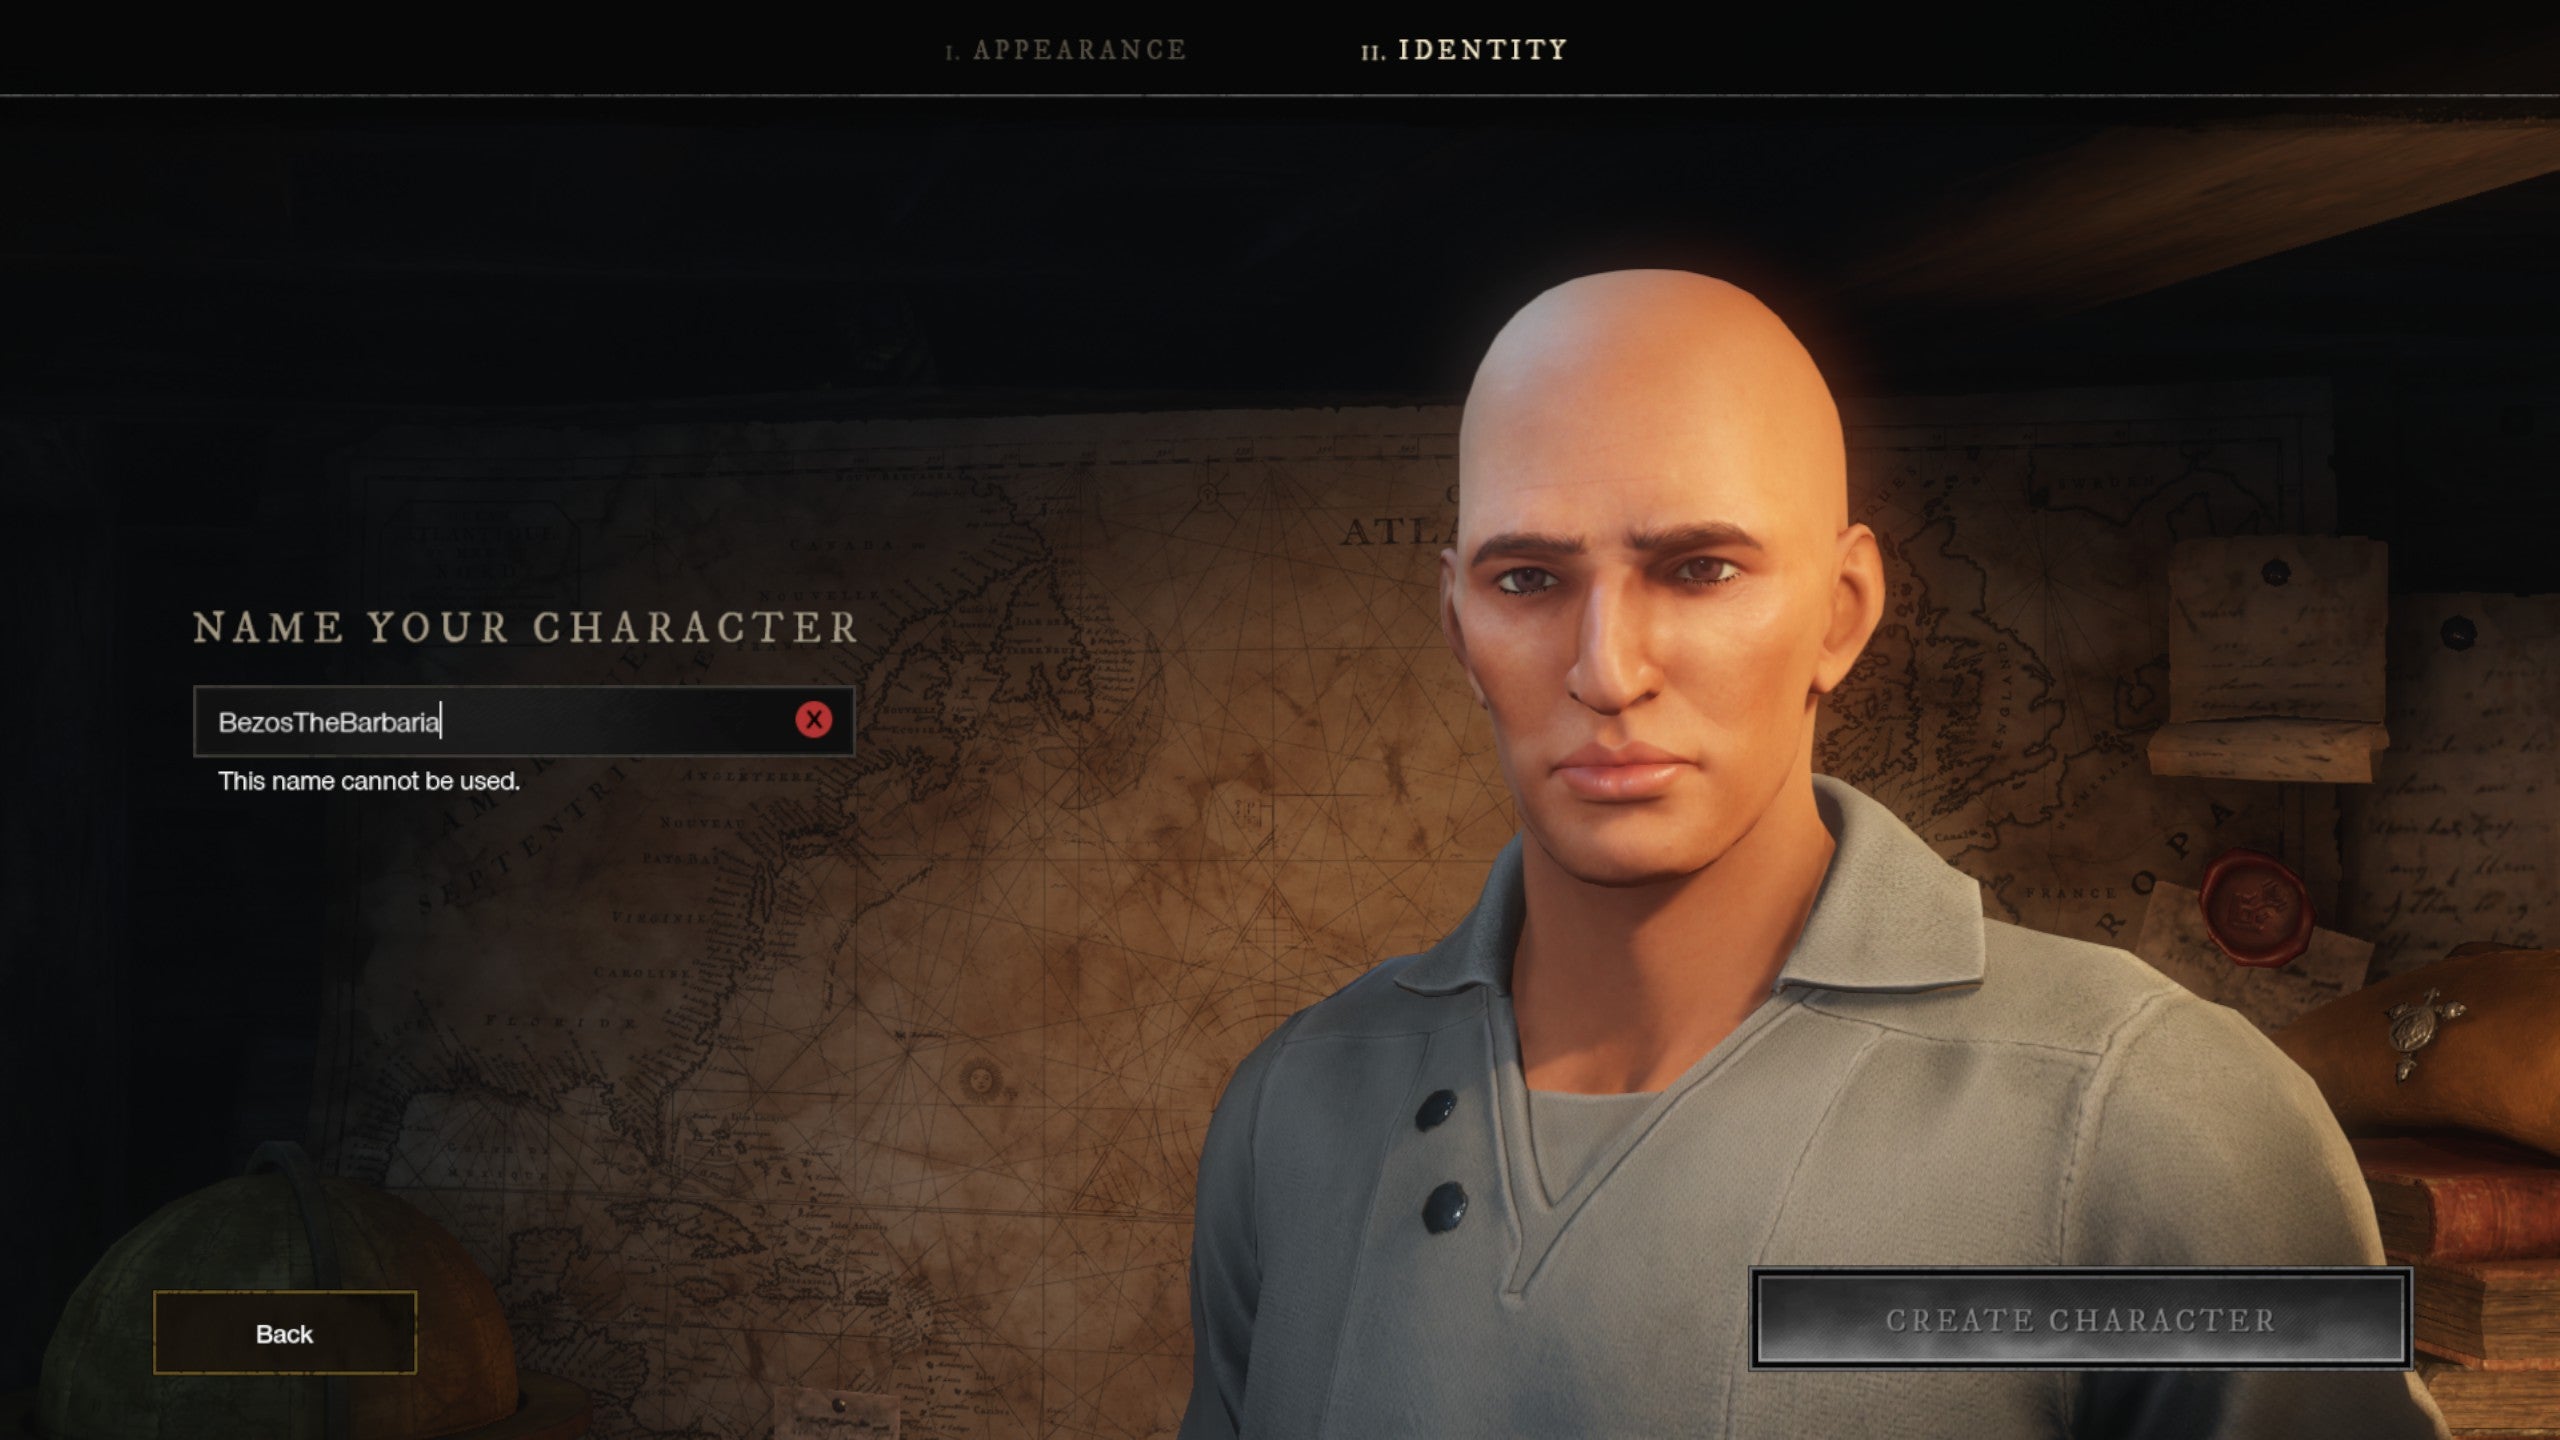 A screenshot showing the character creation name screen in New World, in which the player has attempted to name their character some variation of Jeff Bezos.